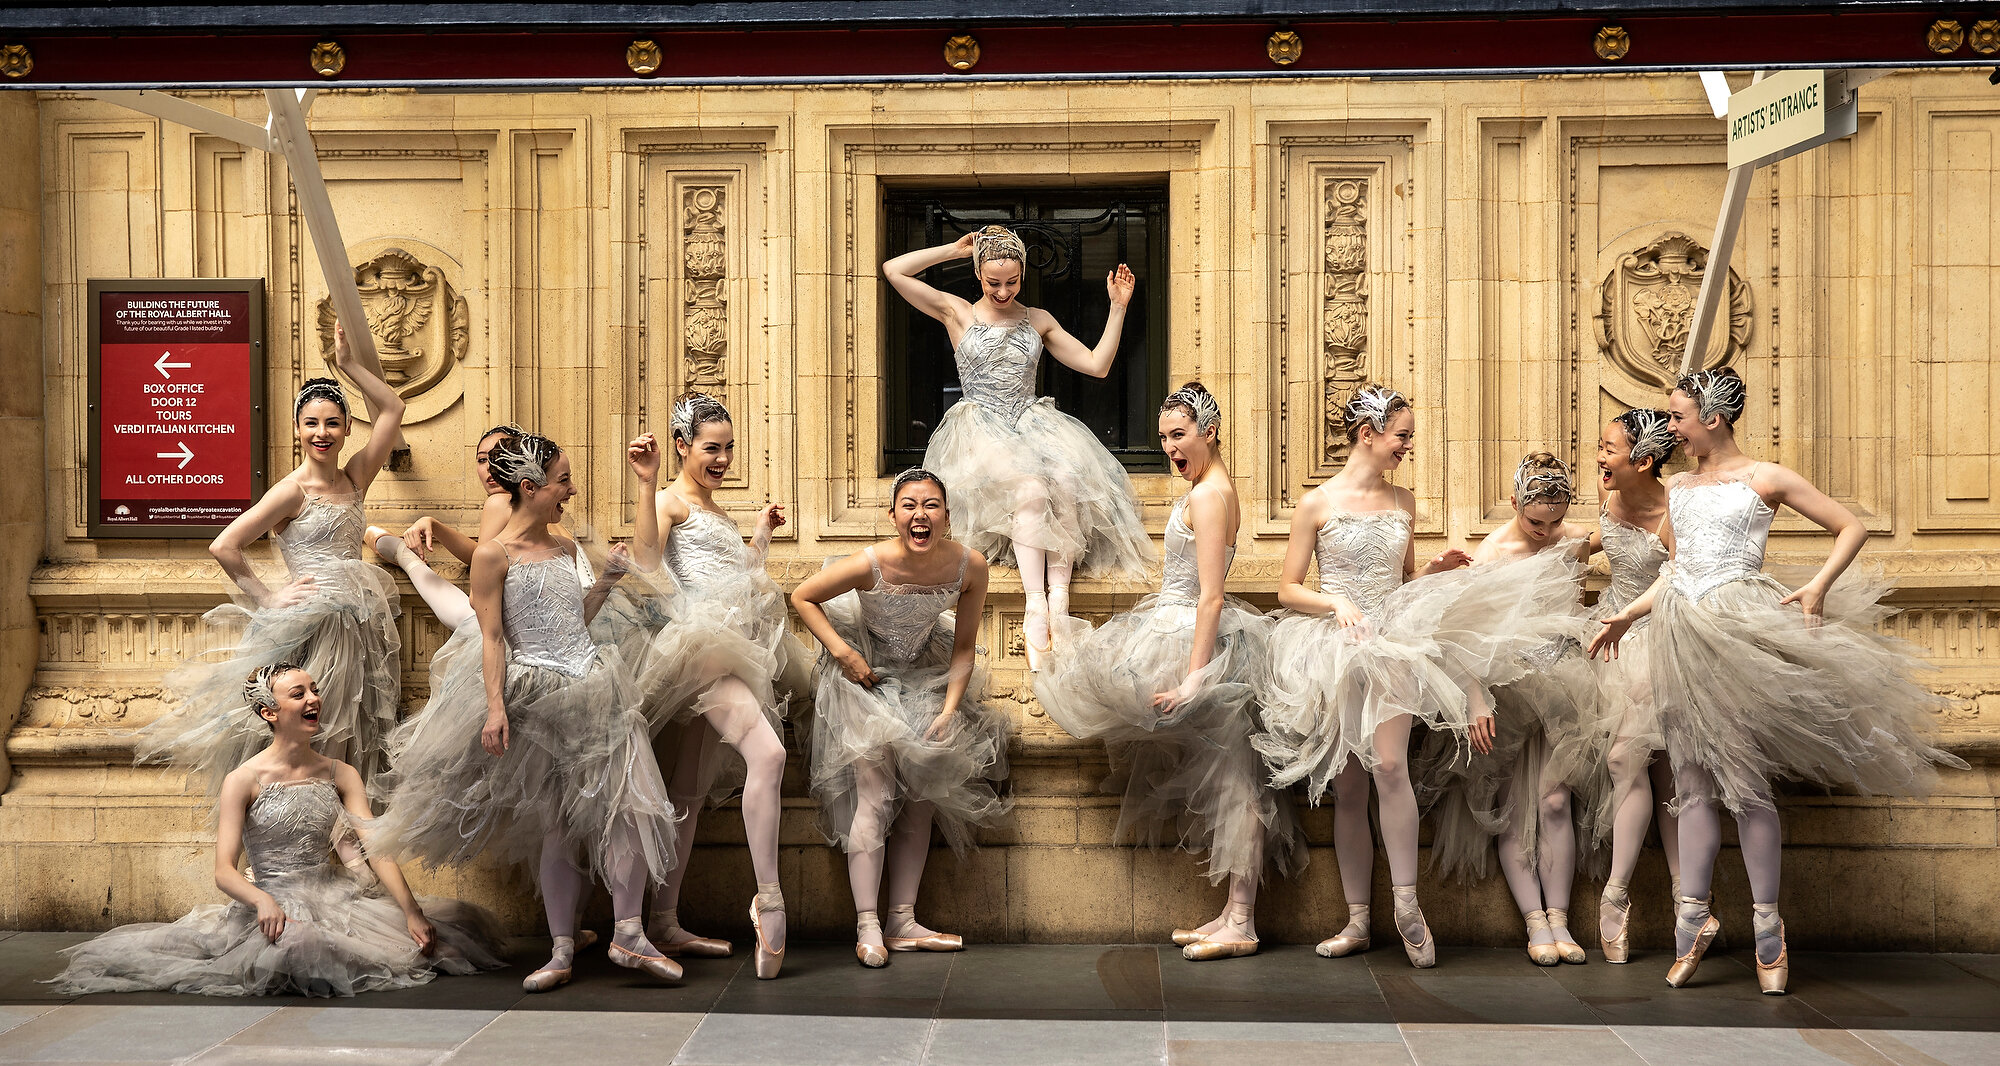  Ballet dancers from the Birmingham Royal Ballet prepare to take part in a photocall outside the Royal Albert Hall in London to promote their Christmas production of The Nutcracker. Photo: Richard Pohle/The Times, 27 June 2019 